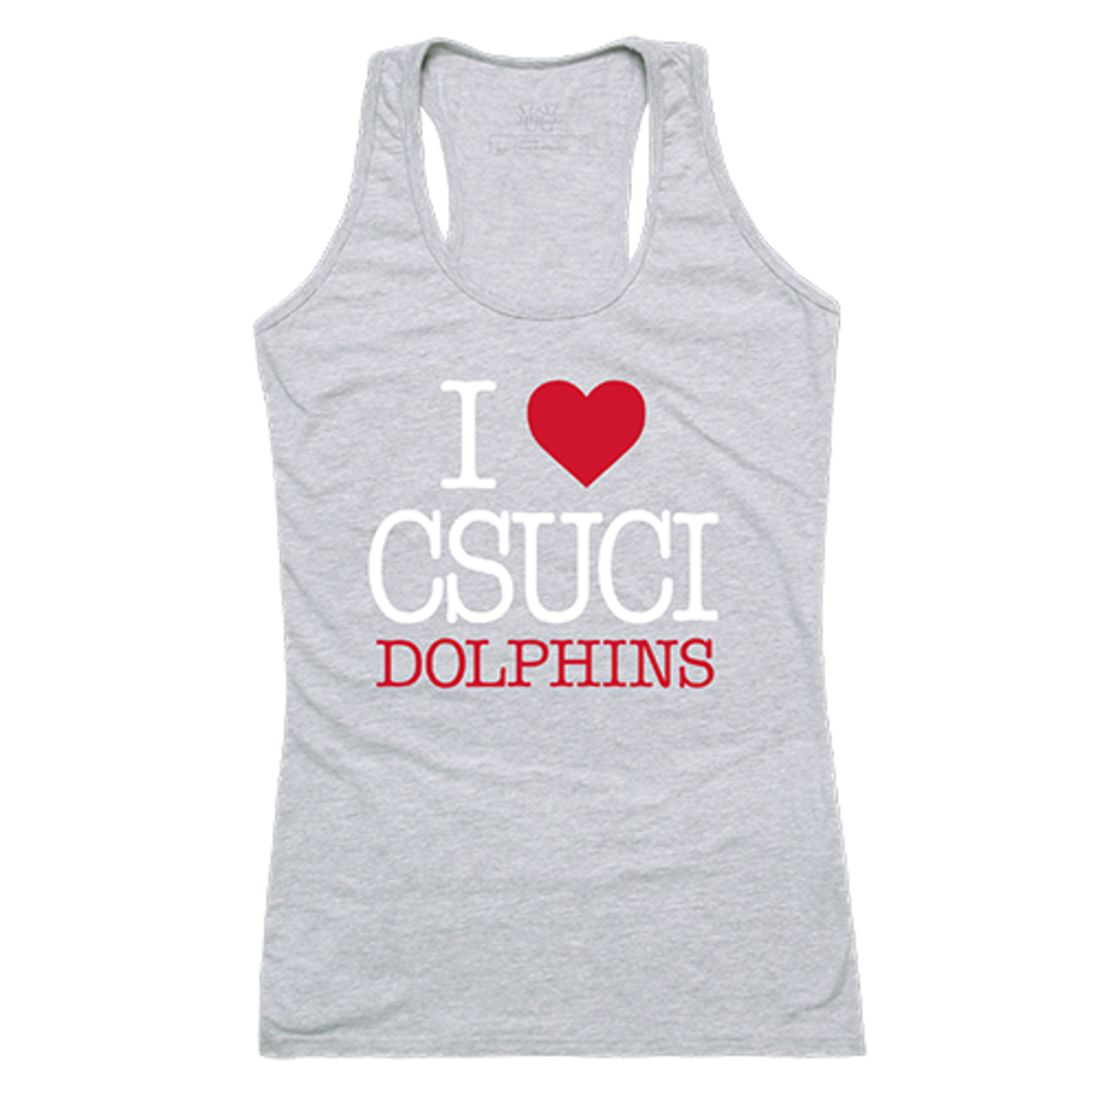 CSUCI CalIfornia State University Channel Islands The Dolphins Womens Love Tank Top Tee T-Shirt Heather Grey-Campus-Wardrobe